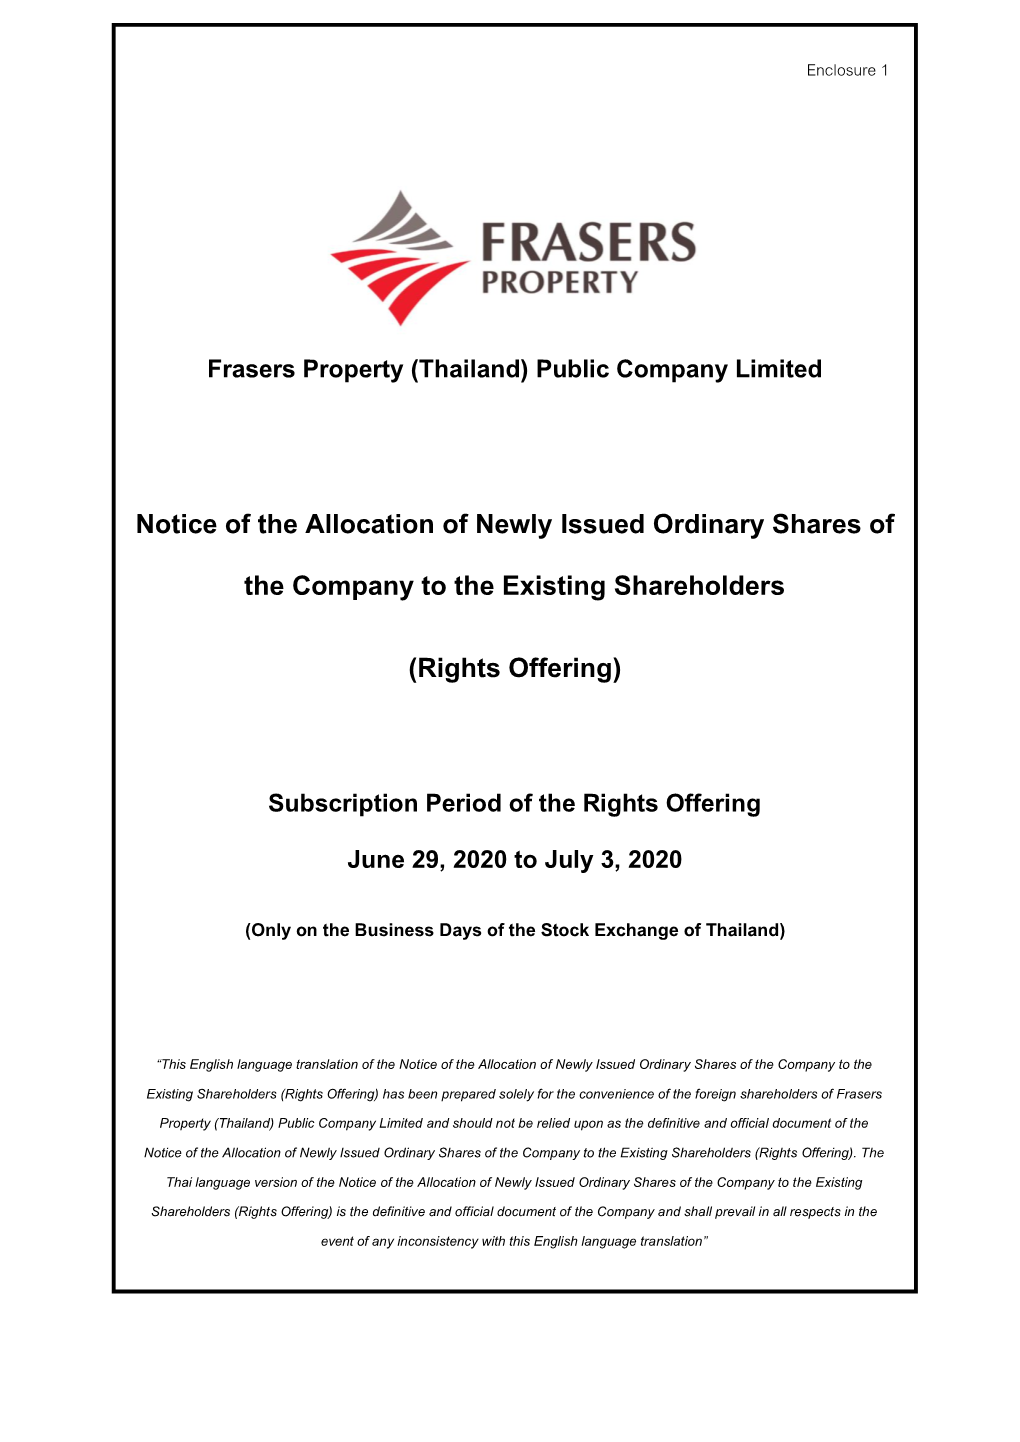 Notice of the Allocation of Newly Issued Ordinary Shares of the Company to the Existing Shareholders